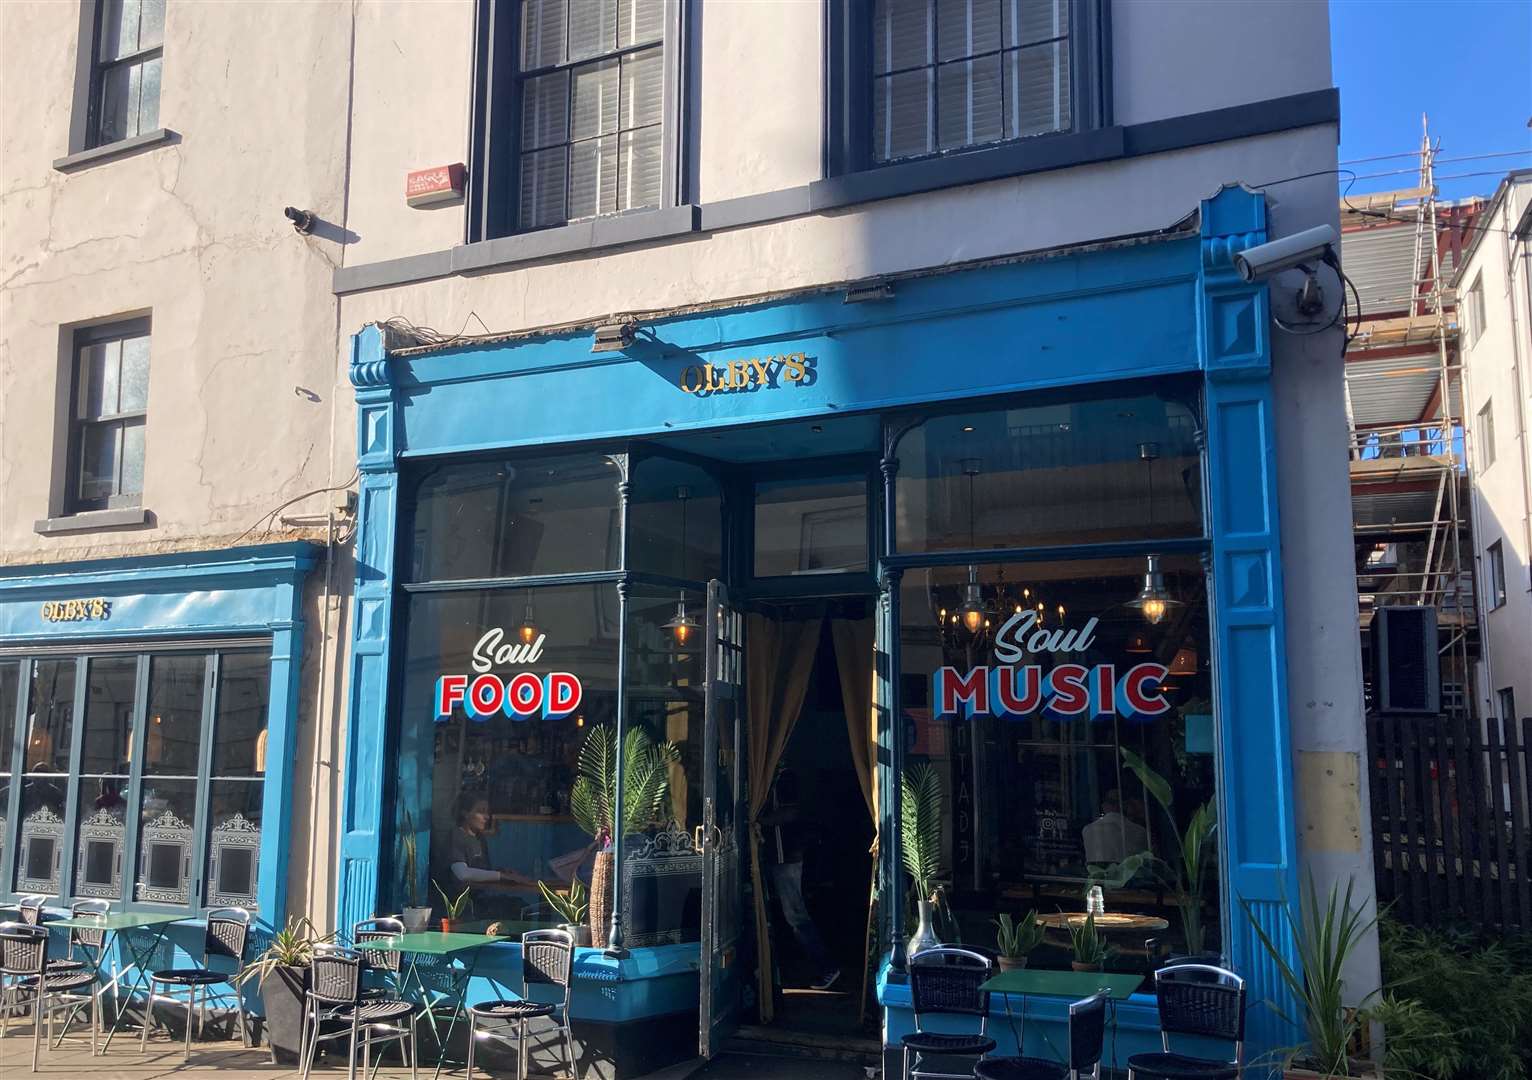 Olby's Soul Cafe on King Street, Margate, was the venue for the hustings